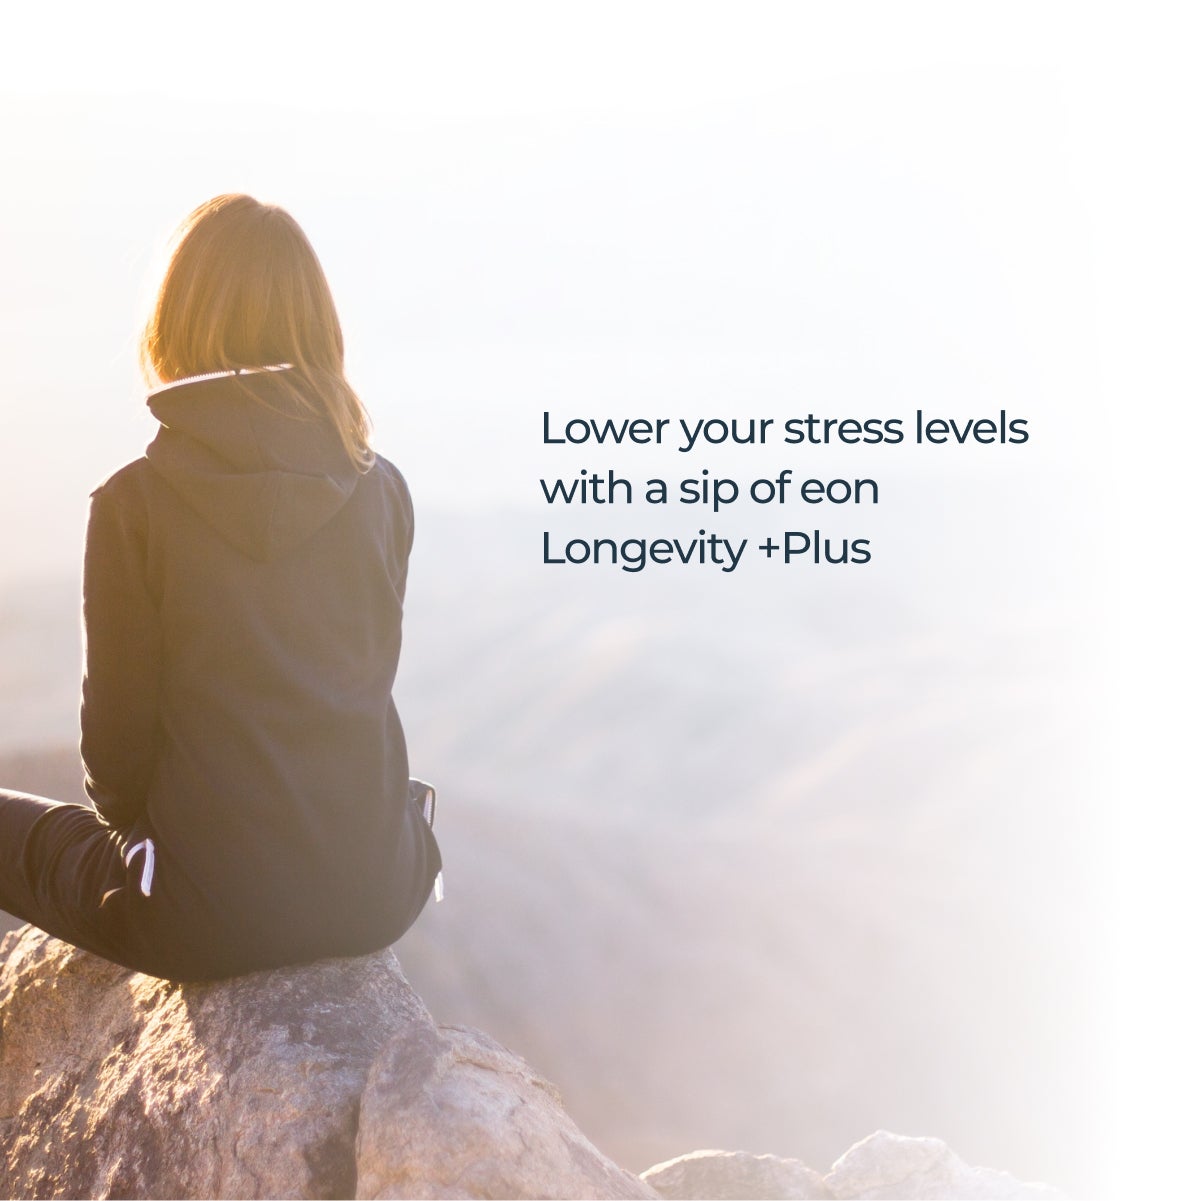 Lower your stress levels with a sip of eon Longevity +Plus